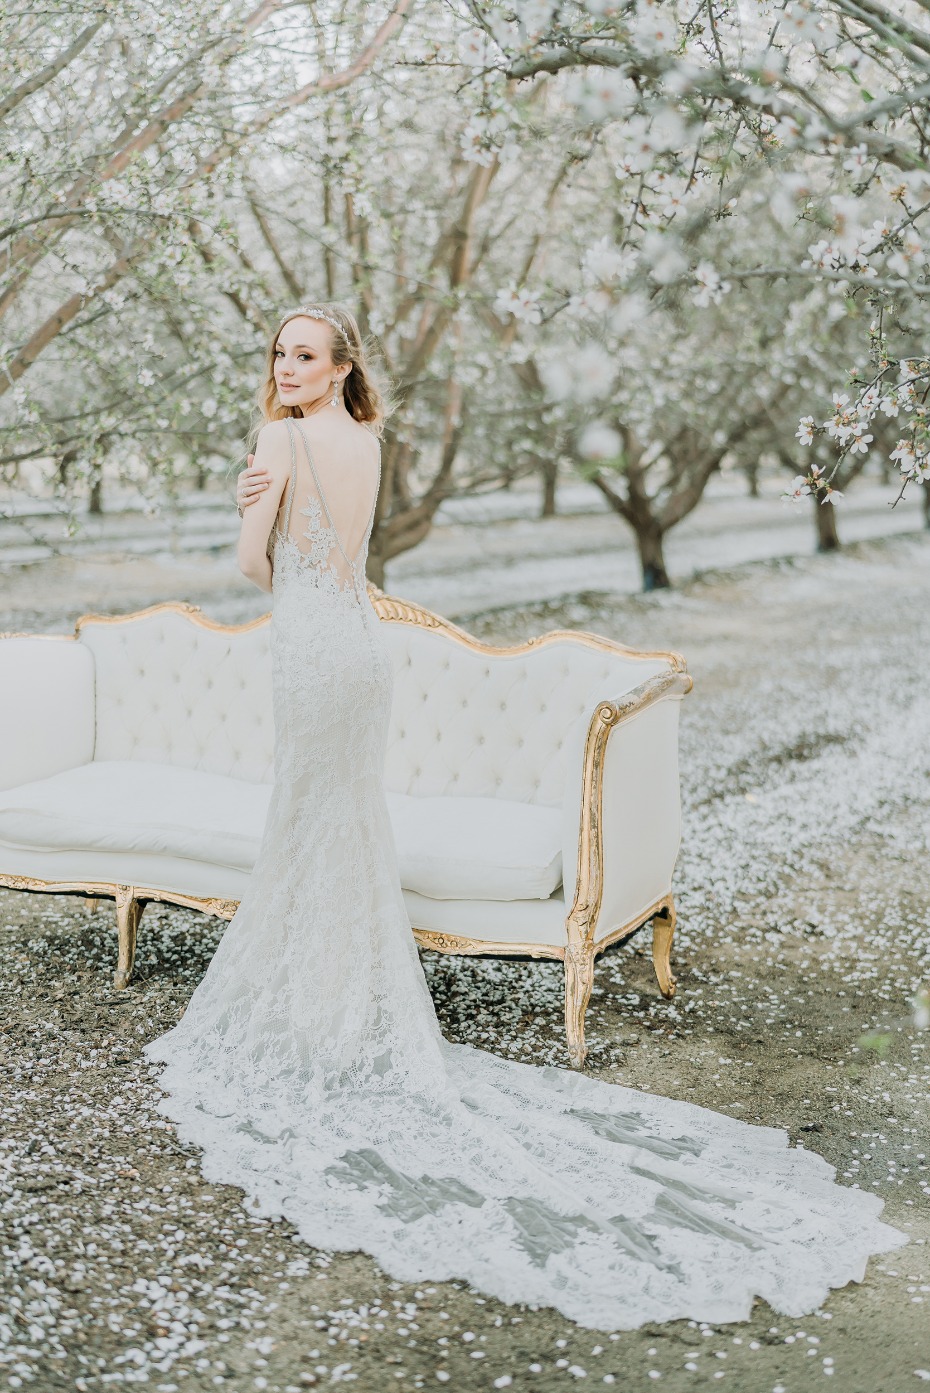 Gorgoeus lace gown from Enzoani